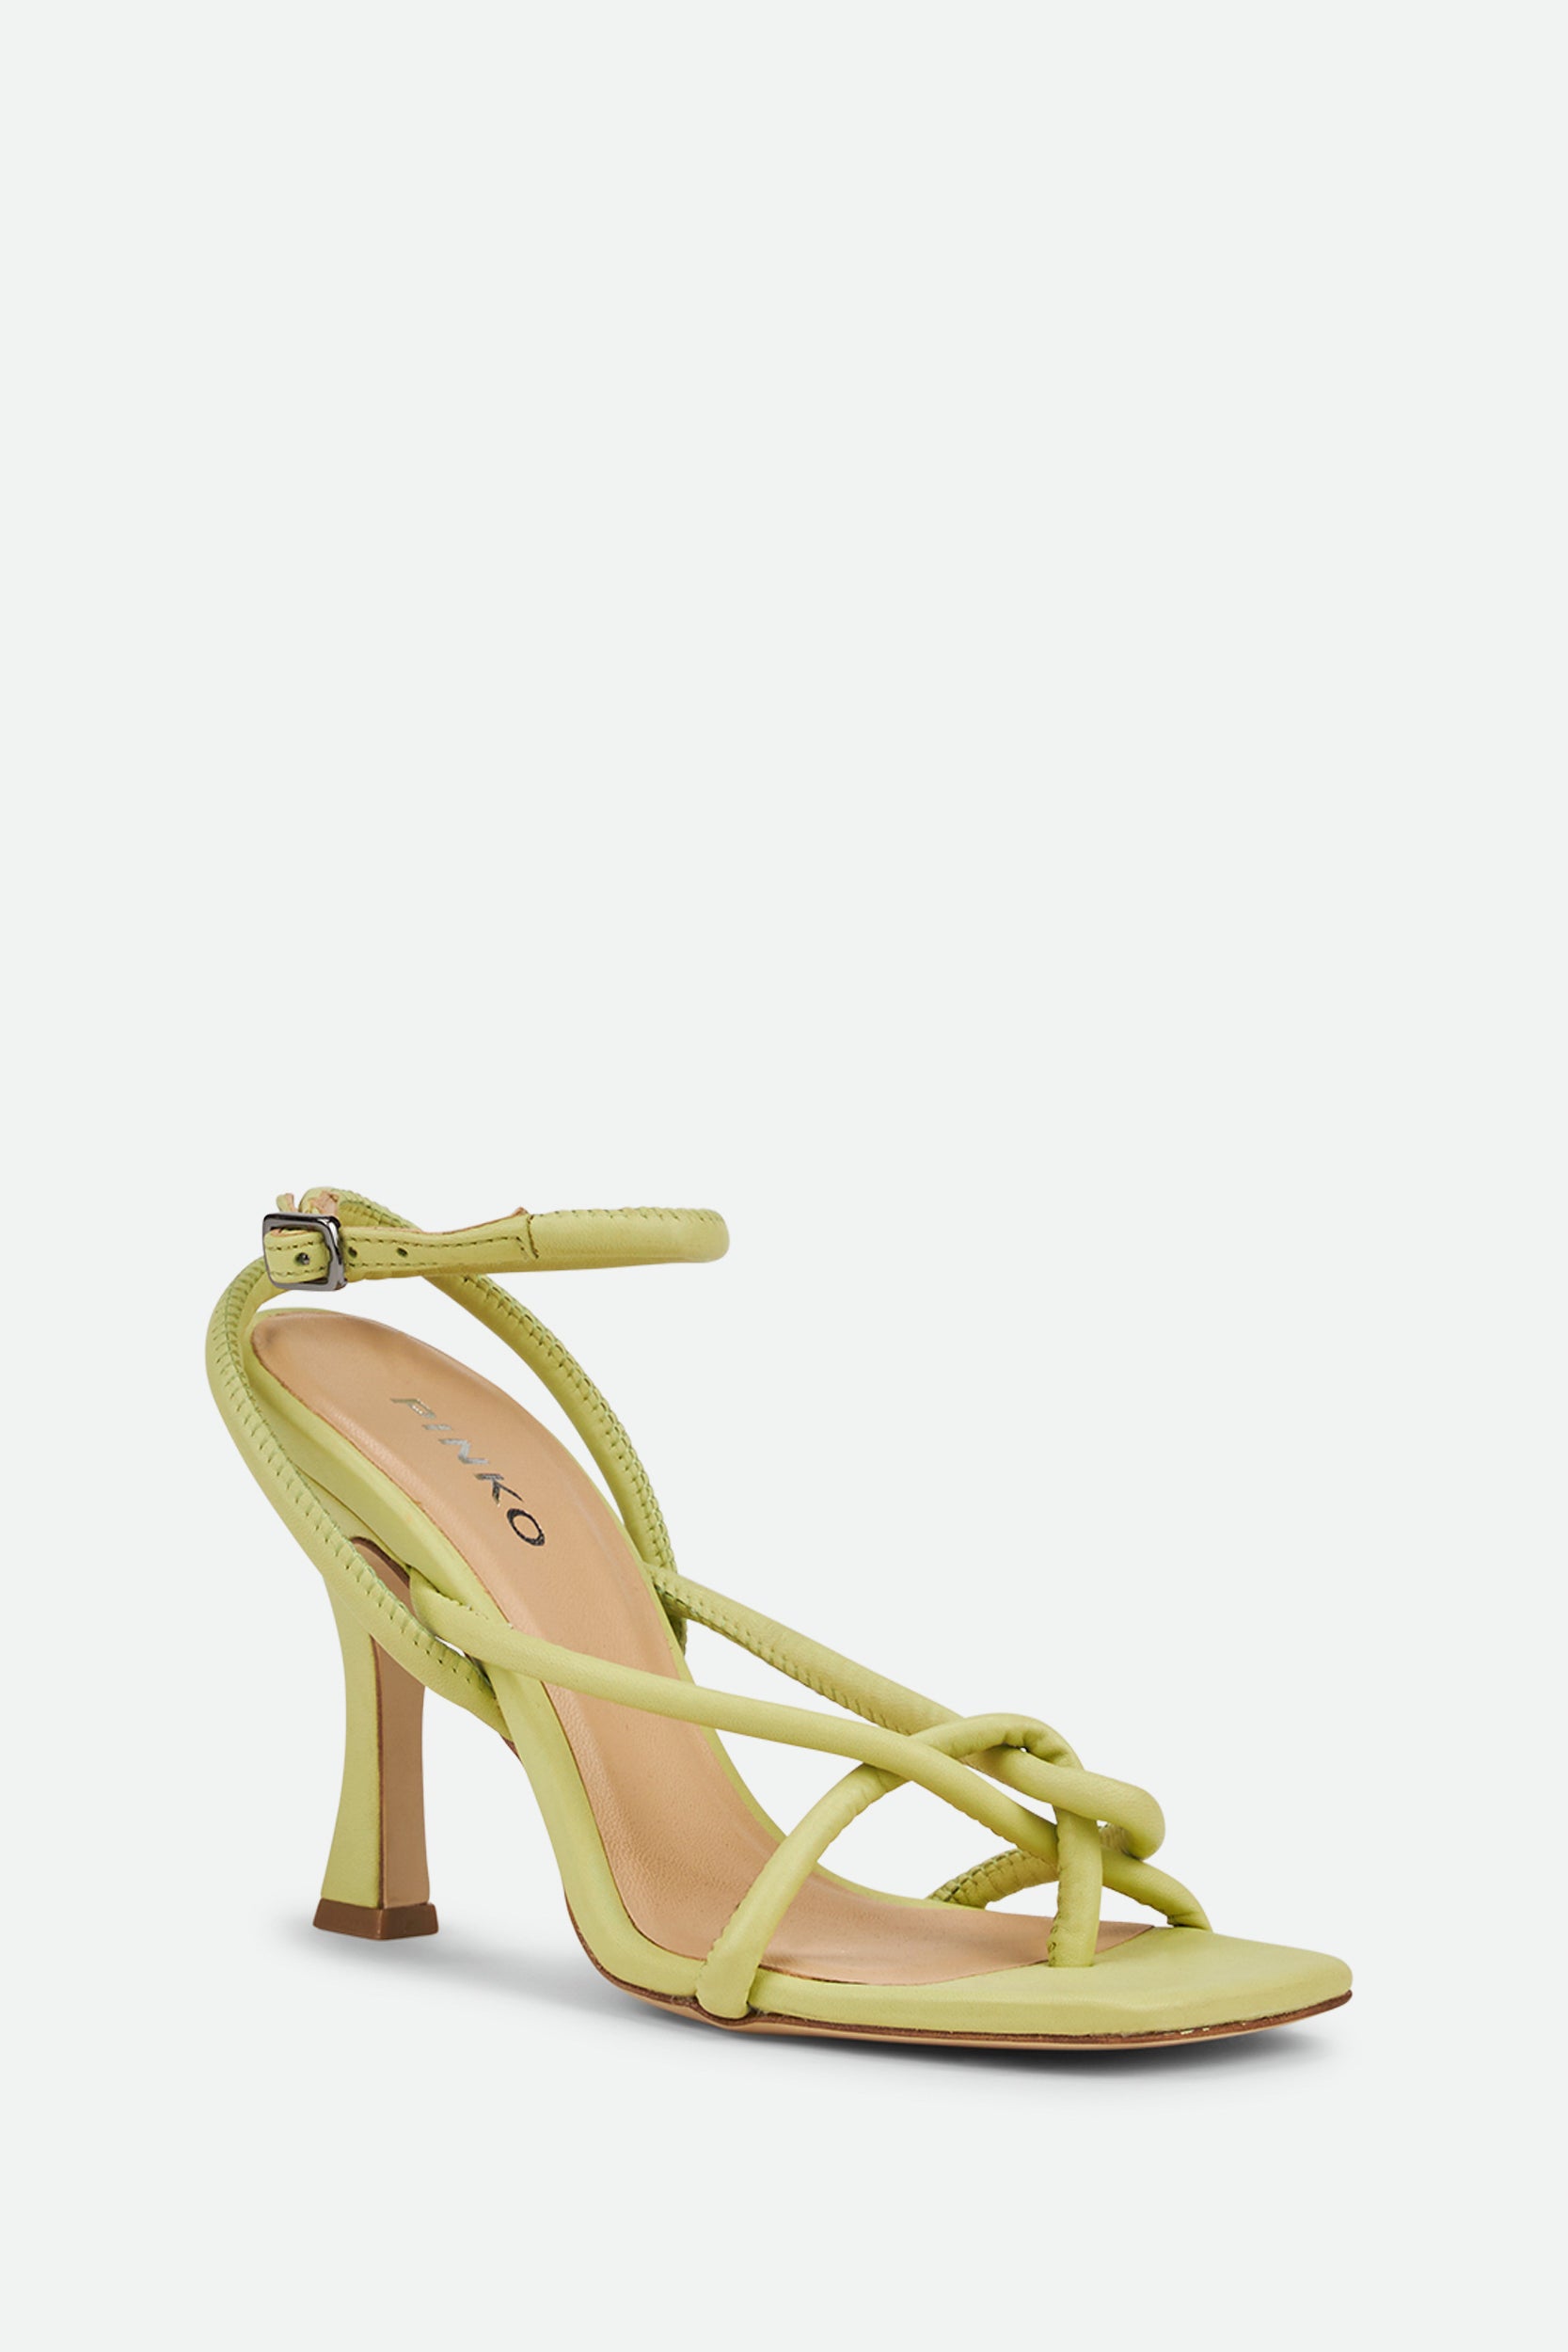 Pinko Sandal in Lime Leather